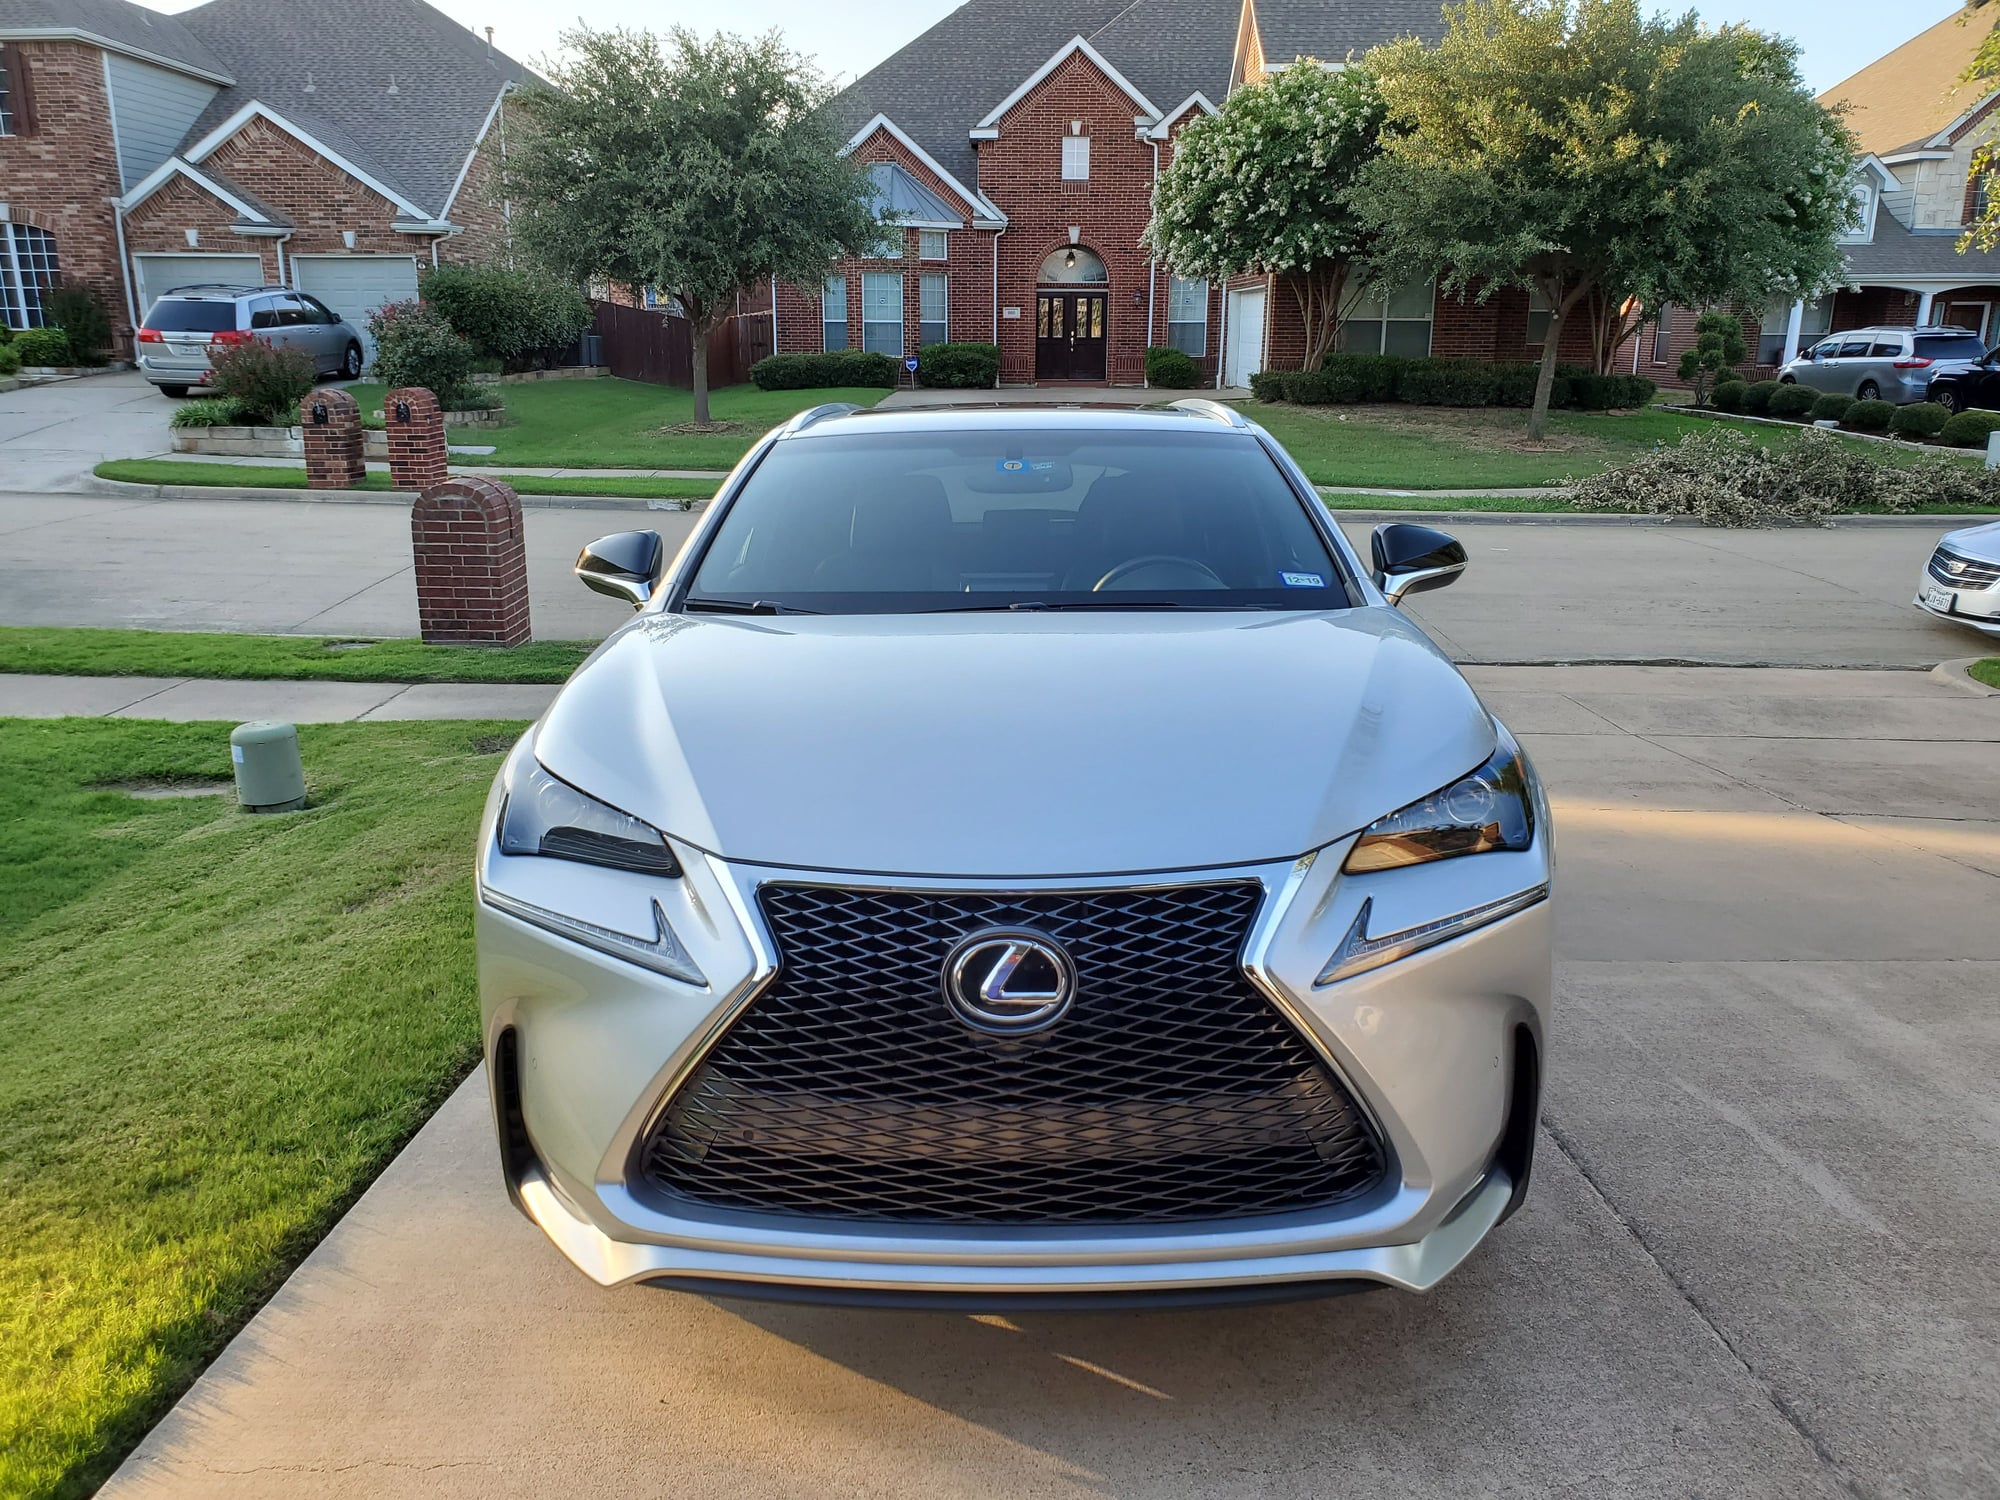 2015 Lexus NX200t - 2015 Lexus NX200t F-Sport, Silver, Excellent Condition, 42k miles - Used - VIN JTYARBZ6F2007027 - 42,500 Miles - 4 cyl - 2WD - Automatic - SUV - Silver - Grand Prairie, TX 75052, United States